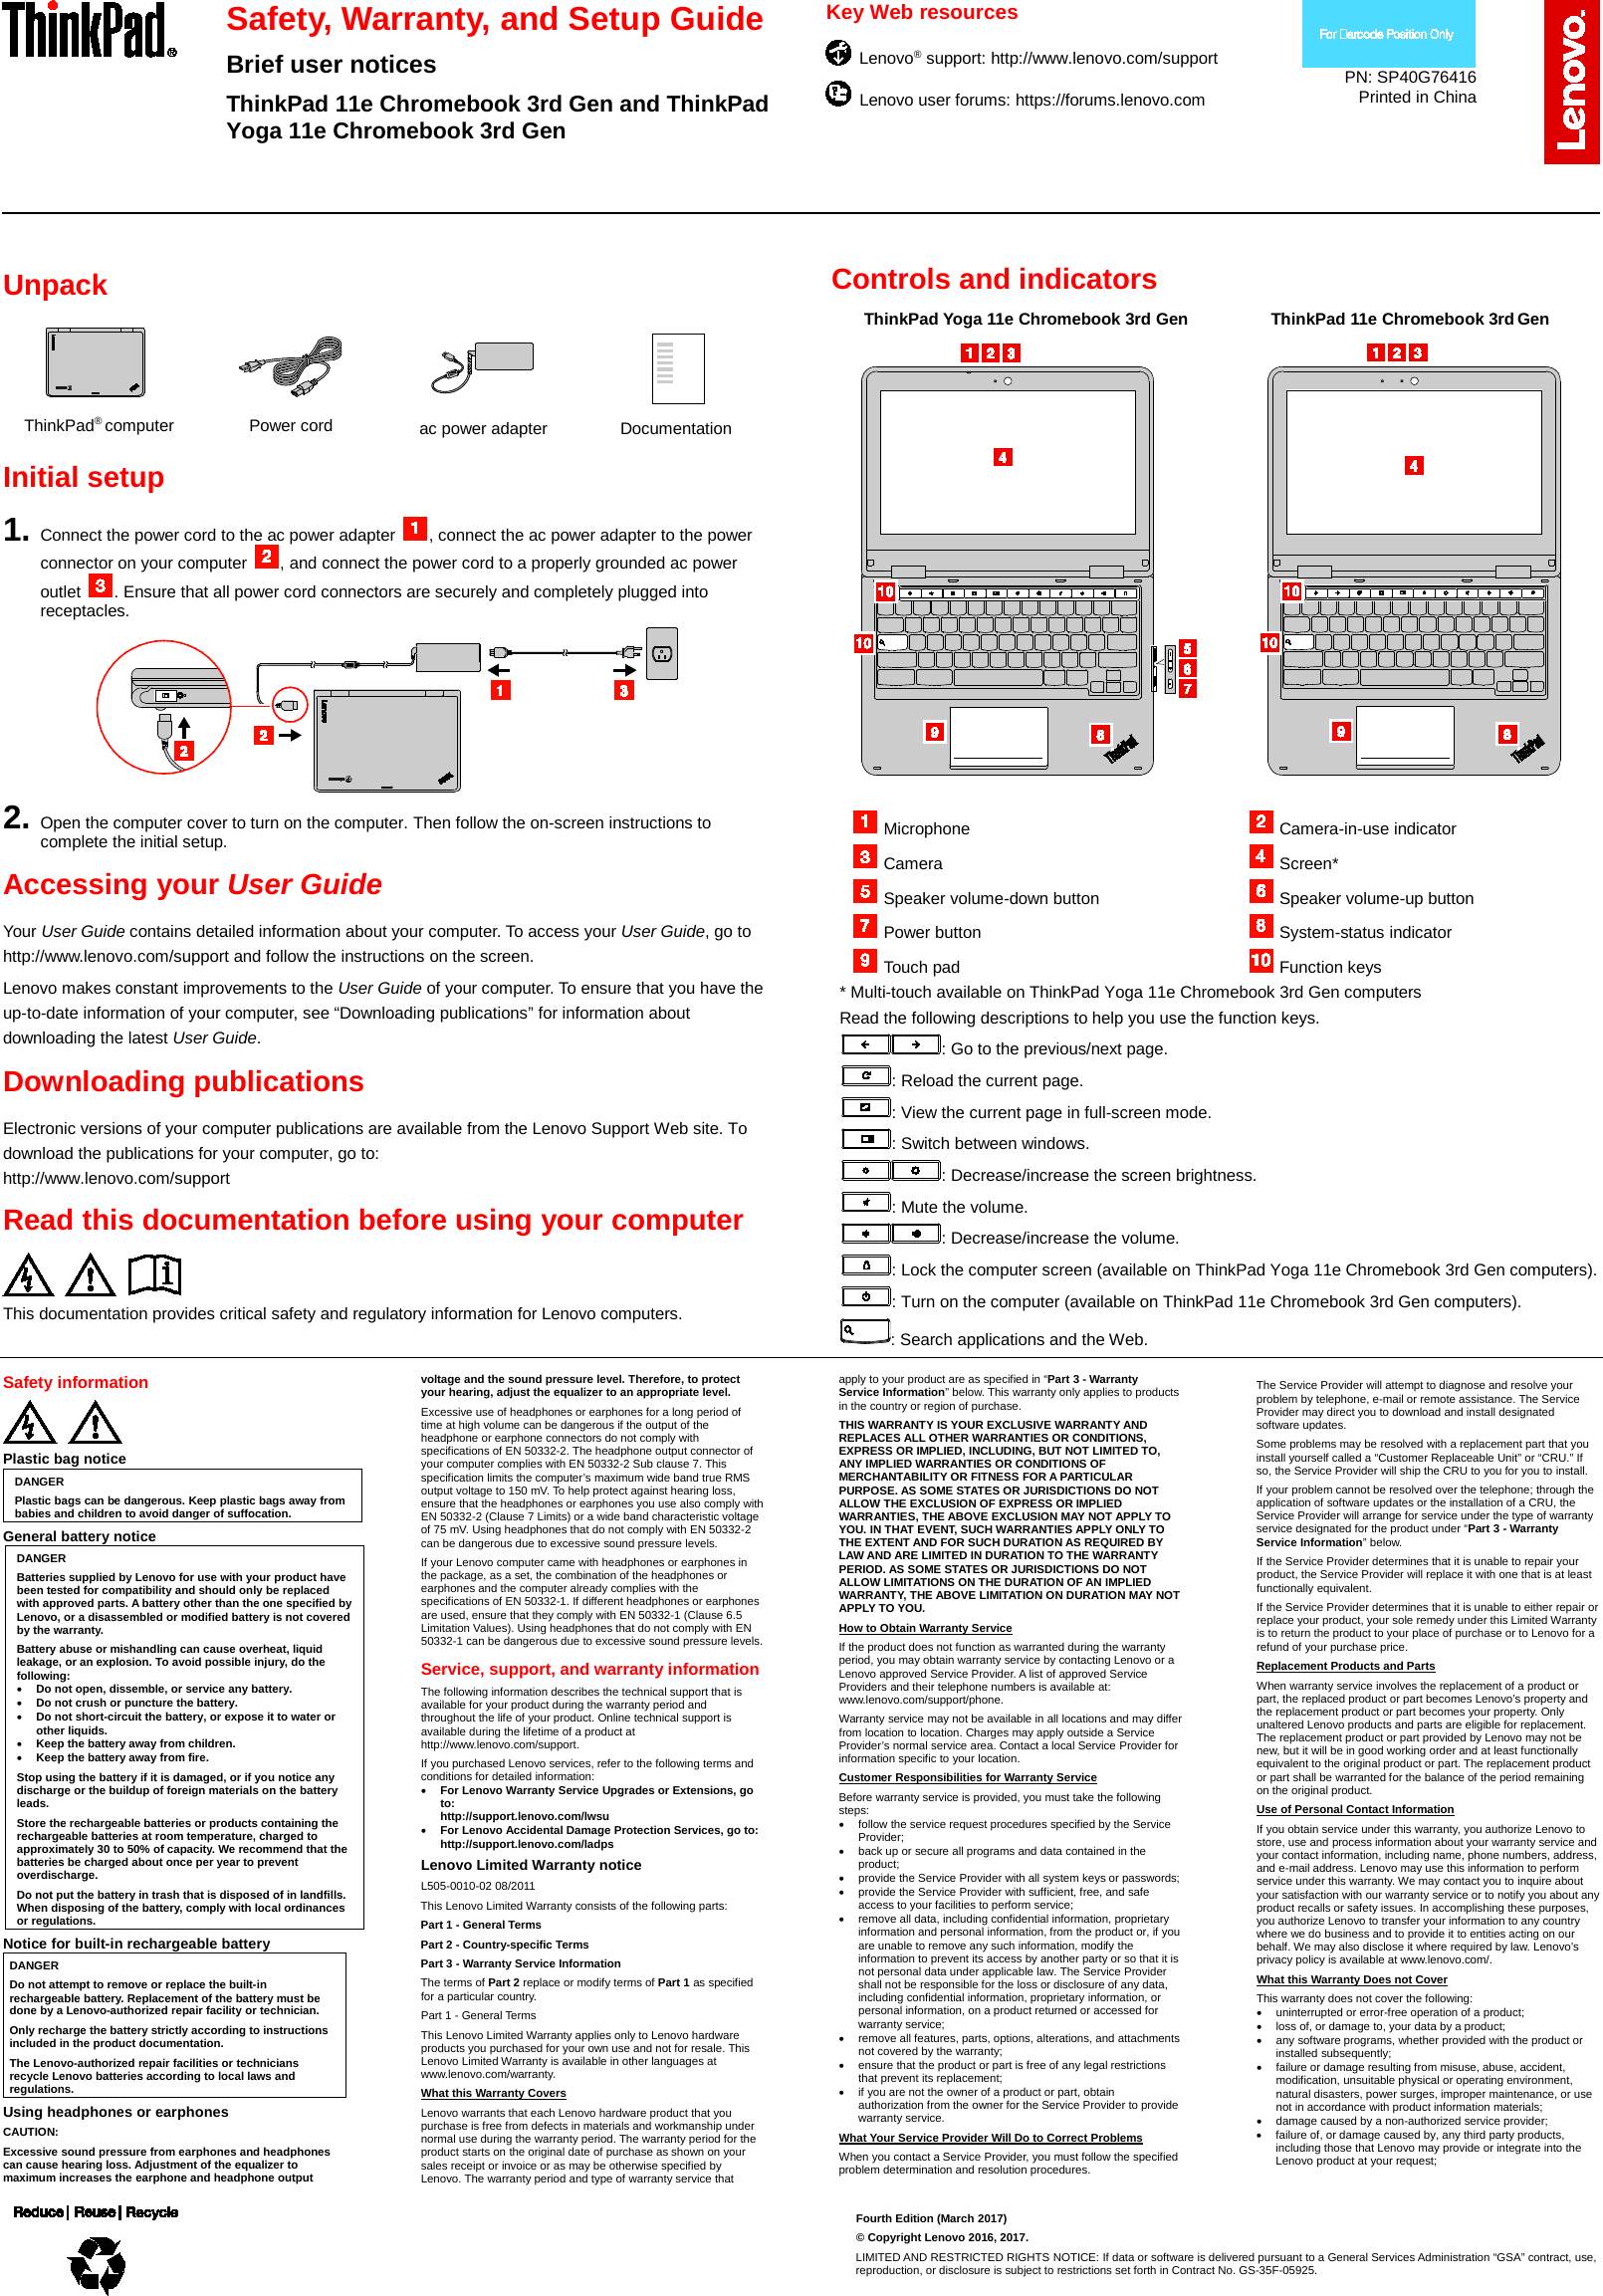 Page 1 of 2 - Lenovo Tp 11E And Yoga Chromebook 3Rdgen Swsg En 2016 Refresh User Manual (English) Safety Warranty Guide - Think Pad Chromebook, 3rd Gen (Type 20DB, 20DU) Laptop (Think Pad) Type 20DB